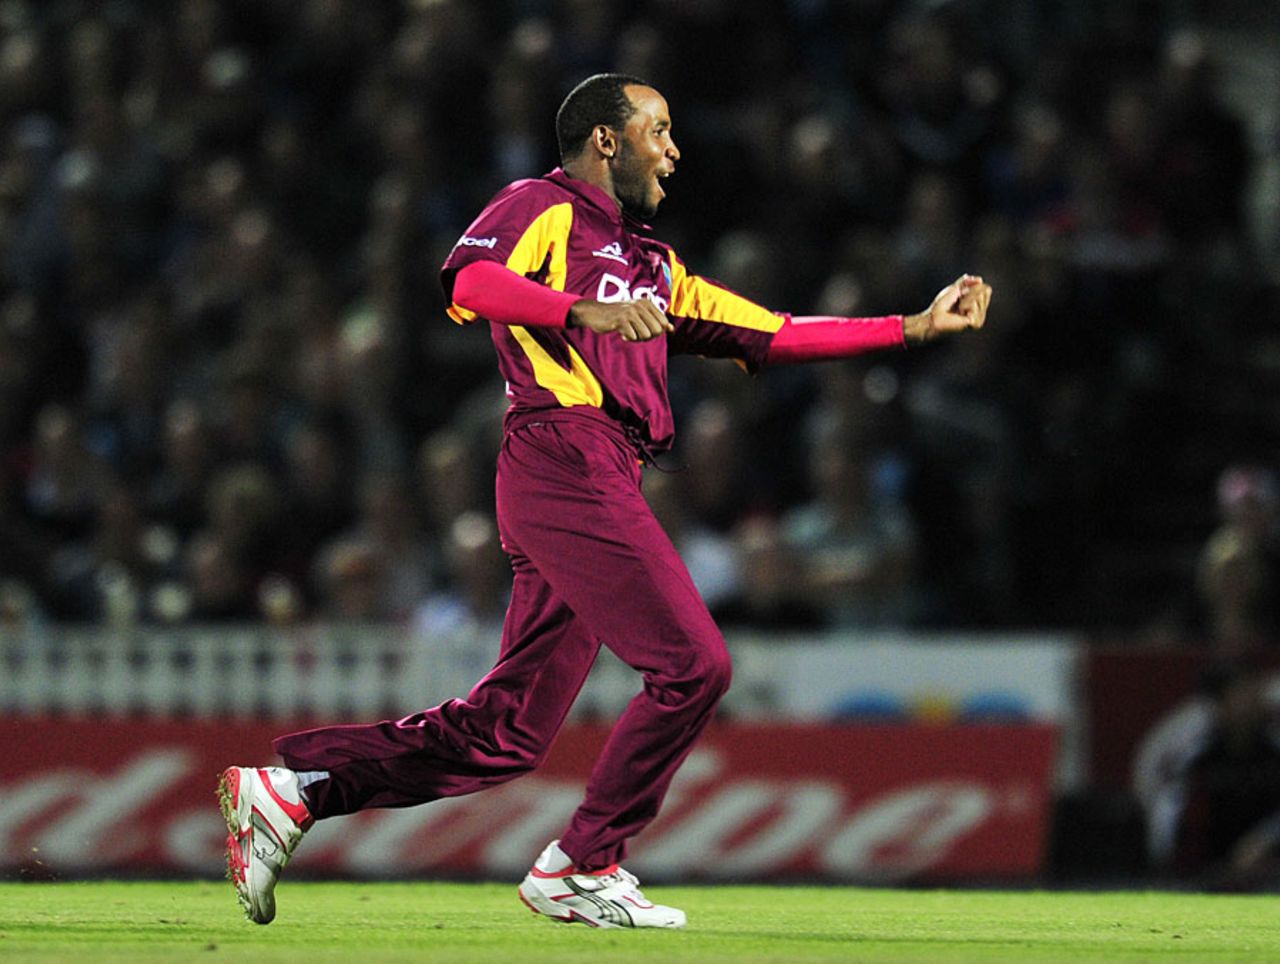 Garey Mathurin bowled a wonderful spell on debut, England v West Indies, 2nd Twenty20, The Oval, September 25, 2011